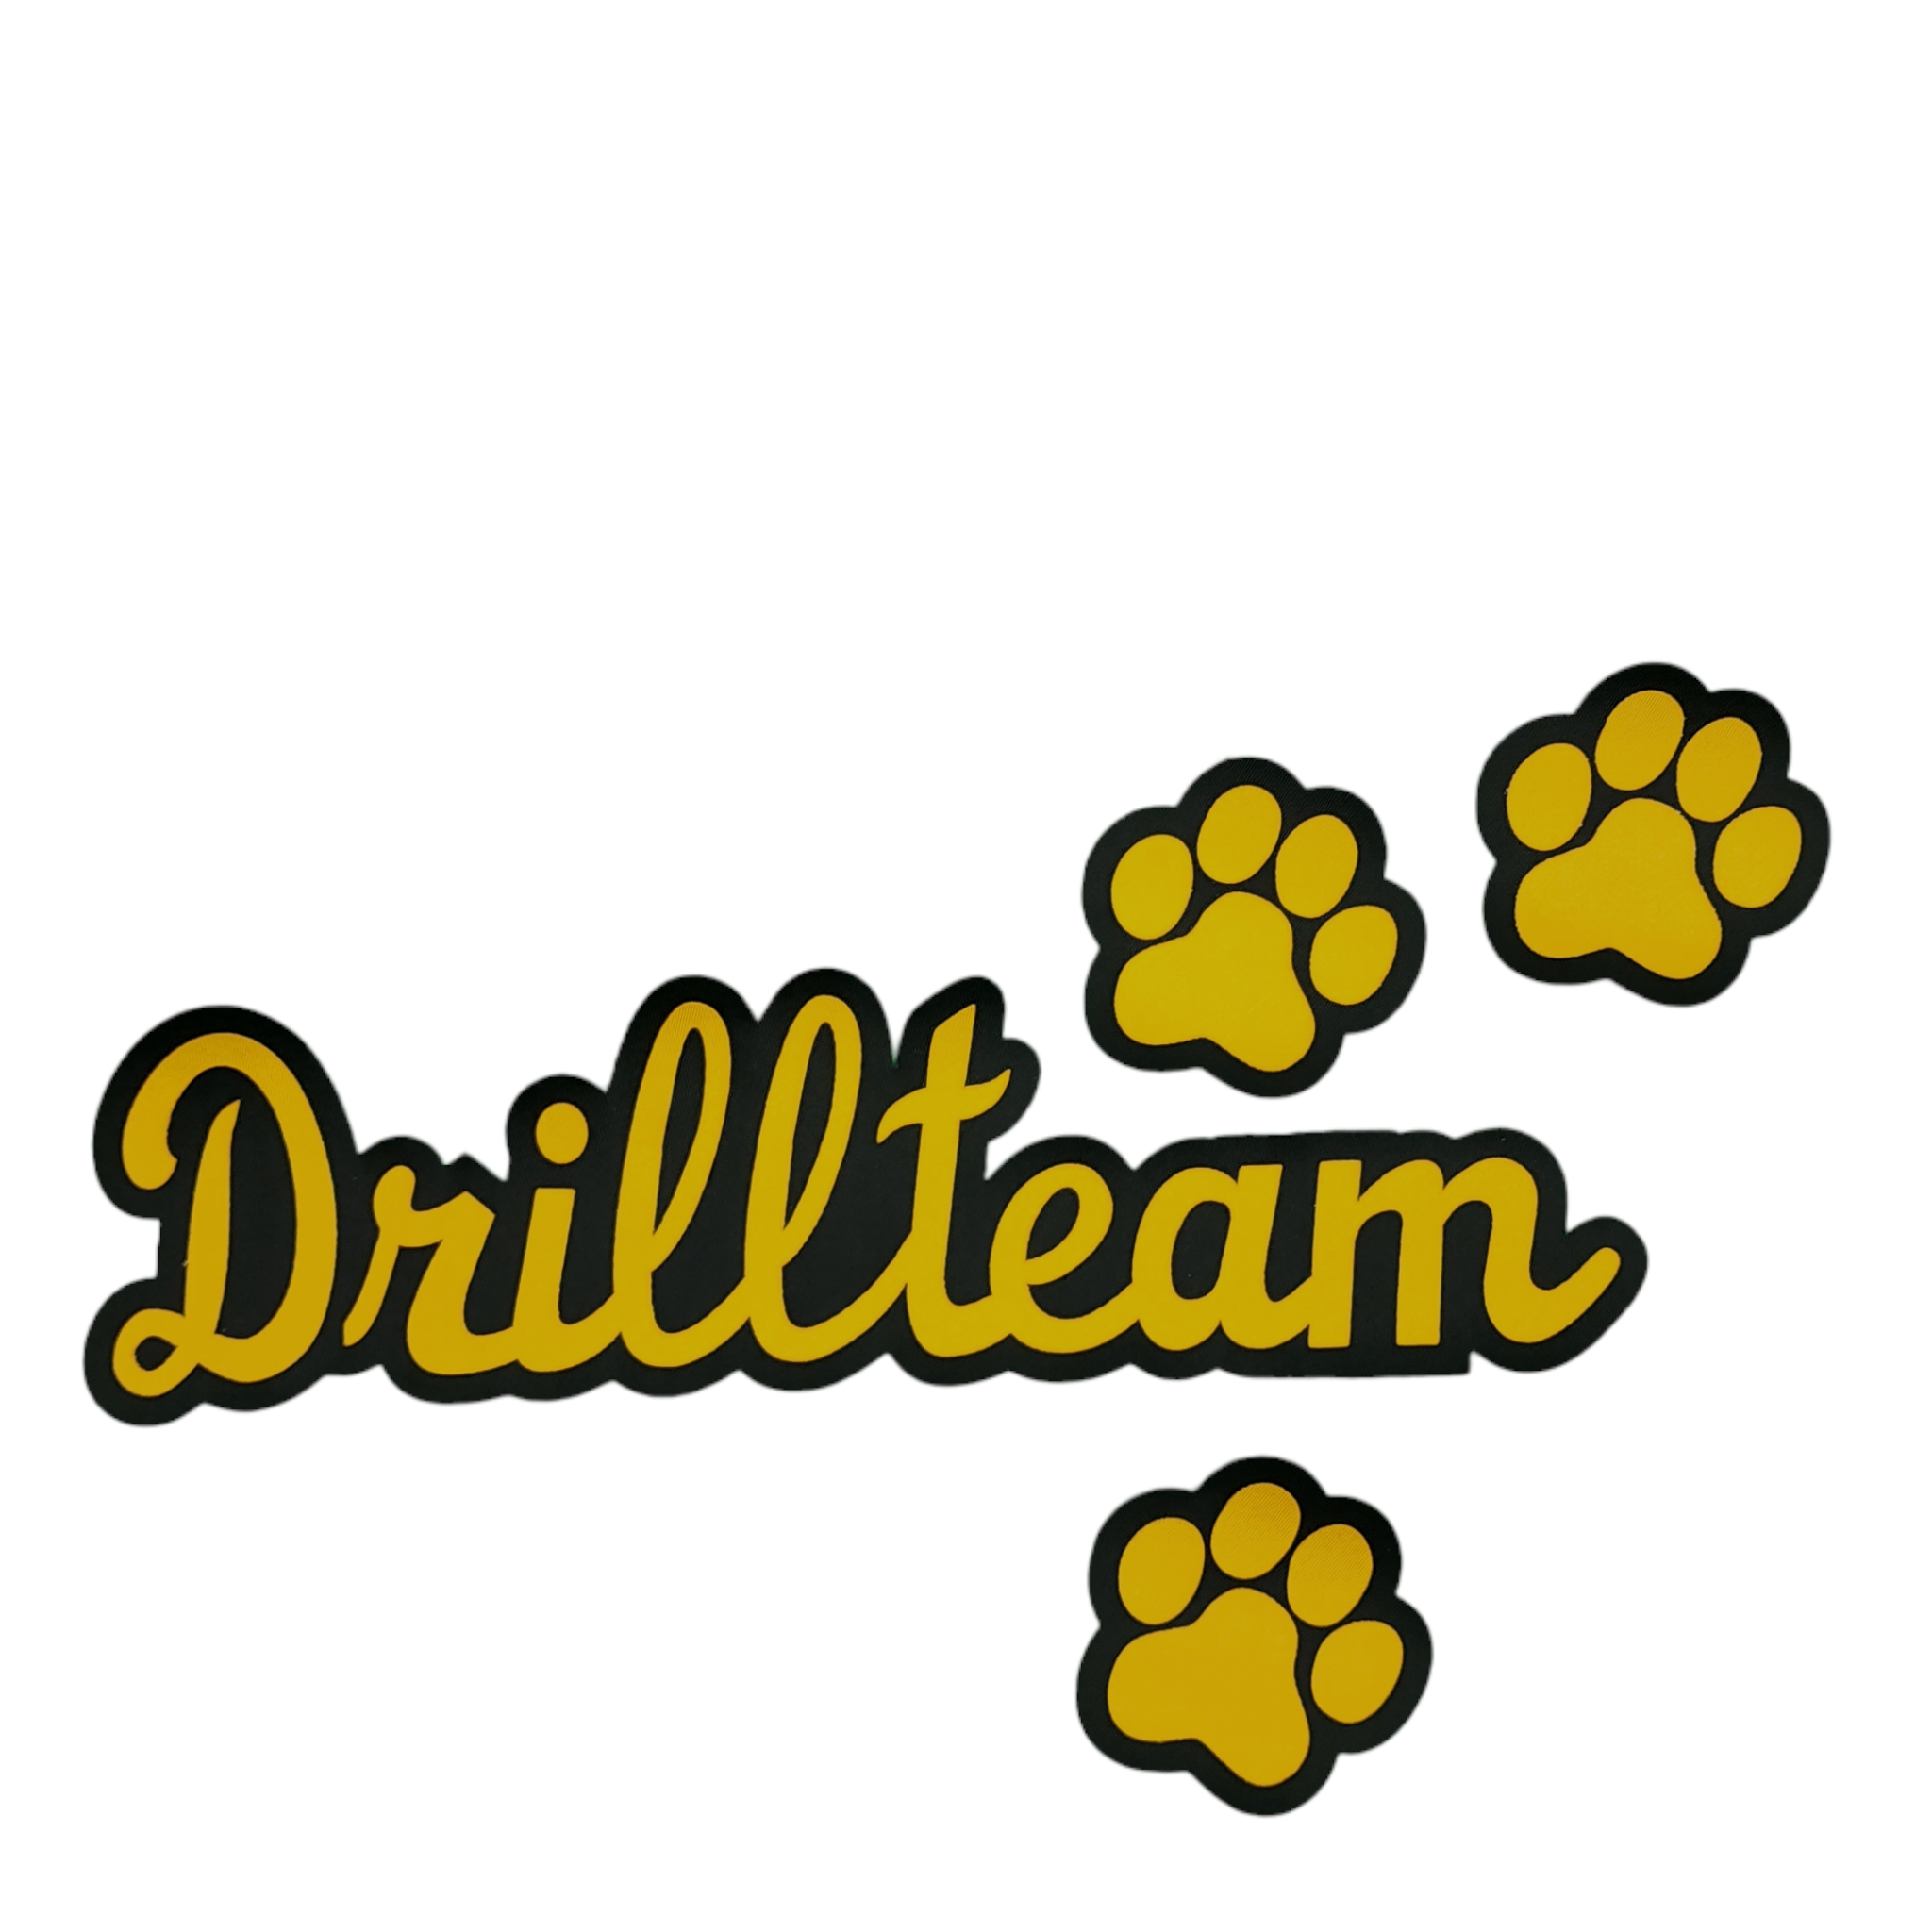 Two Color Drillteam Tackle Twill Script Name With Paw Prints